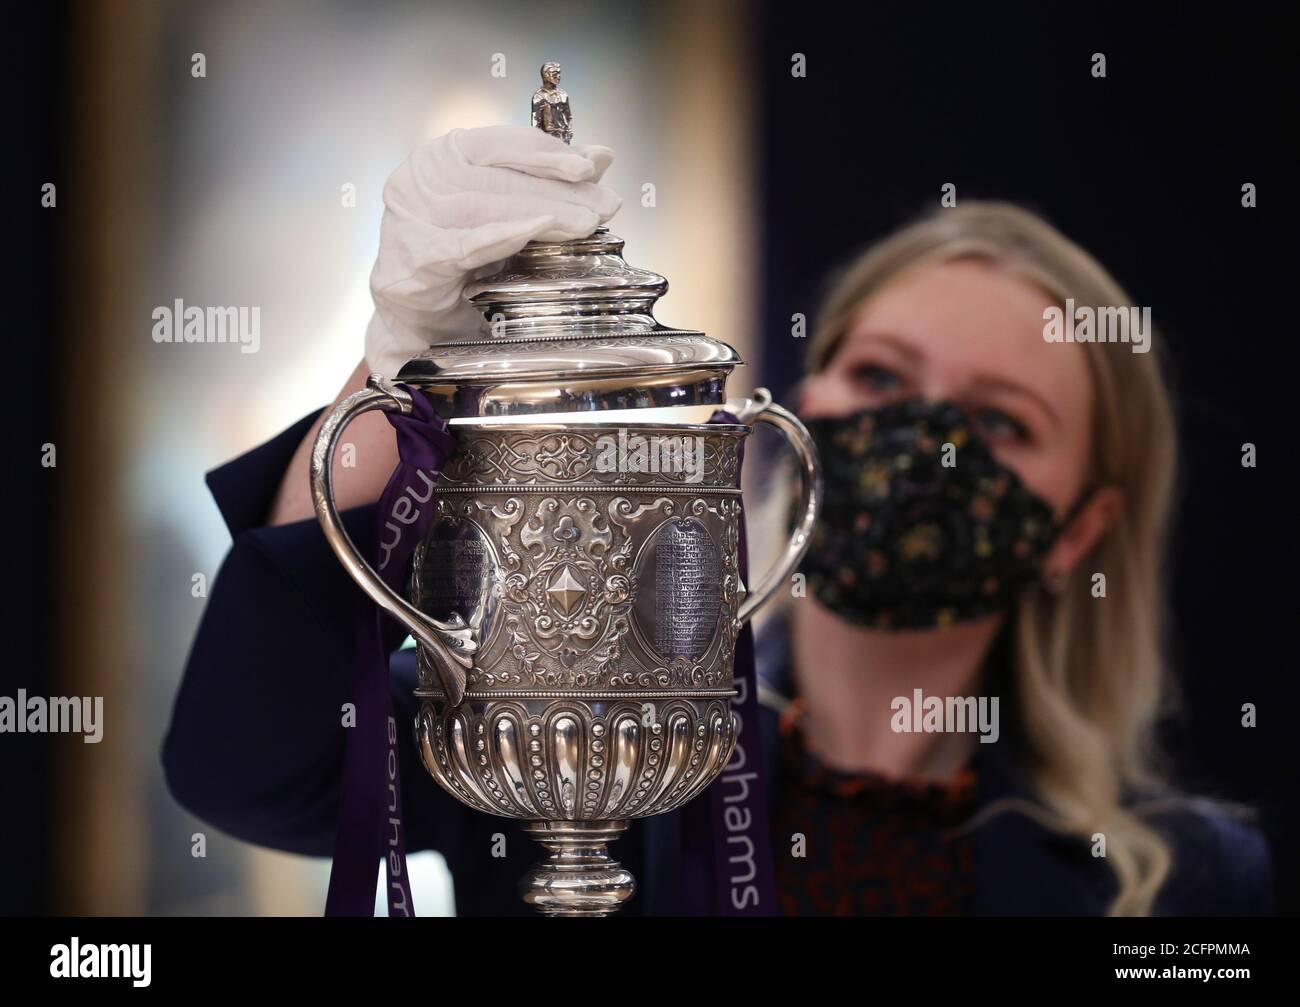 Laurel Kemp of Bonhams with the oldest surviving FA Cup trophy during a preview of the Sporting Trophies Sale at which will take place as Bonhams New Bond Street saleroom on September 29. The silver two-handled cup, estimated at GBP 700,000 -900,000, was made by Vaughton and Sons of Birmingham in 1896, and was presented to the FA Cup winning teams between 1896 and 1910, including Manchester United, Manchester City, Everton, Newcastle United and Tottenham Hotspur. Stock Photo